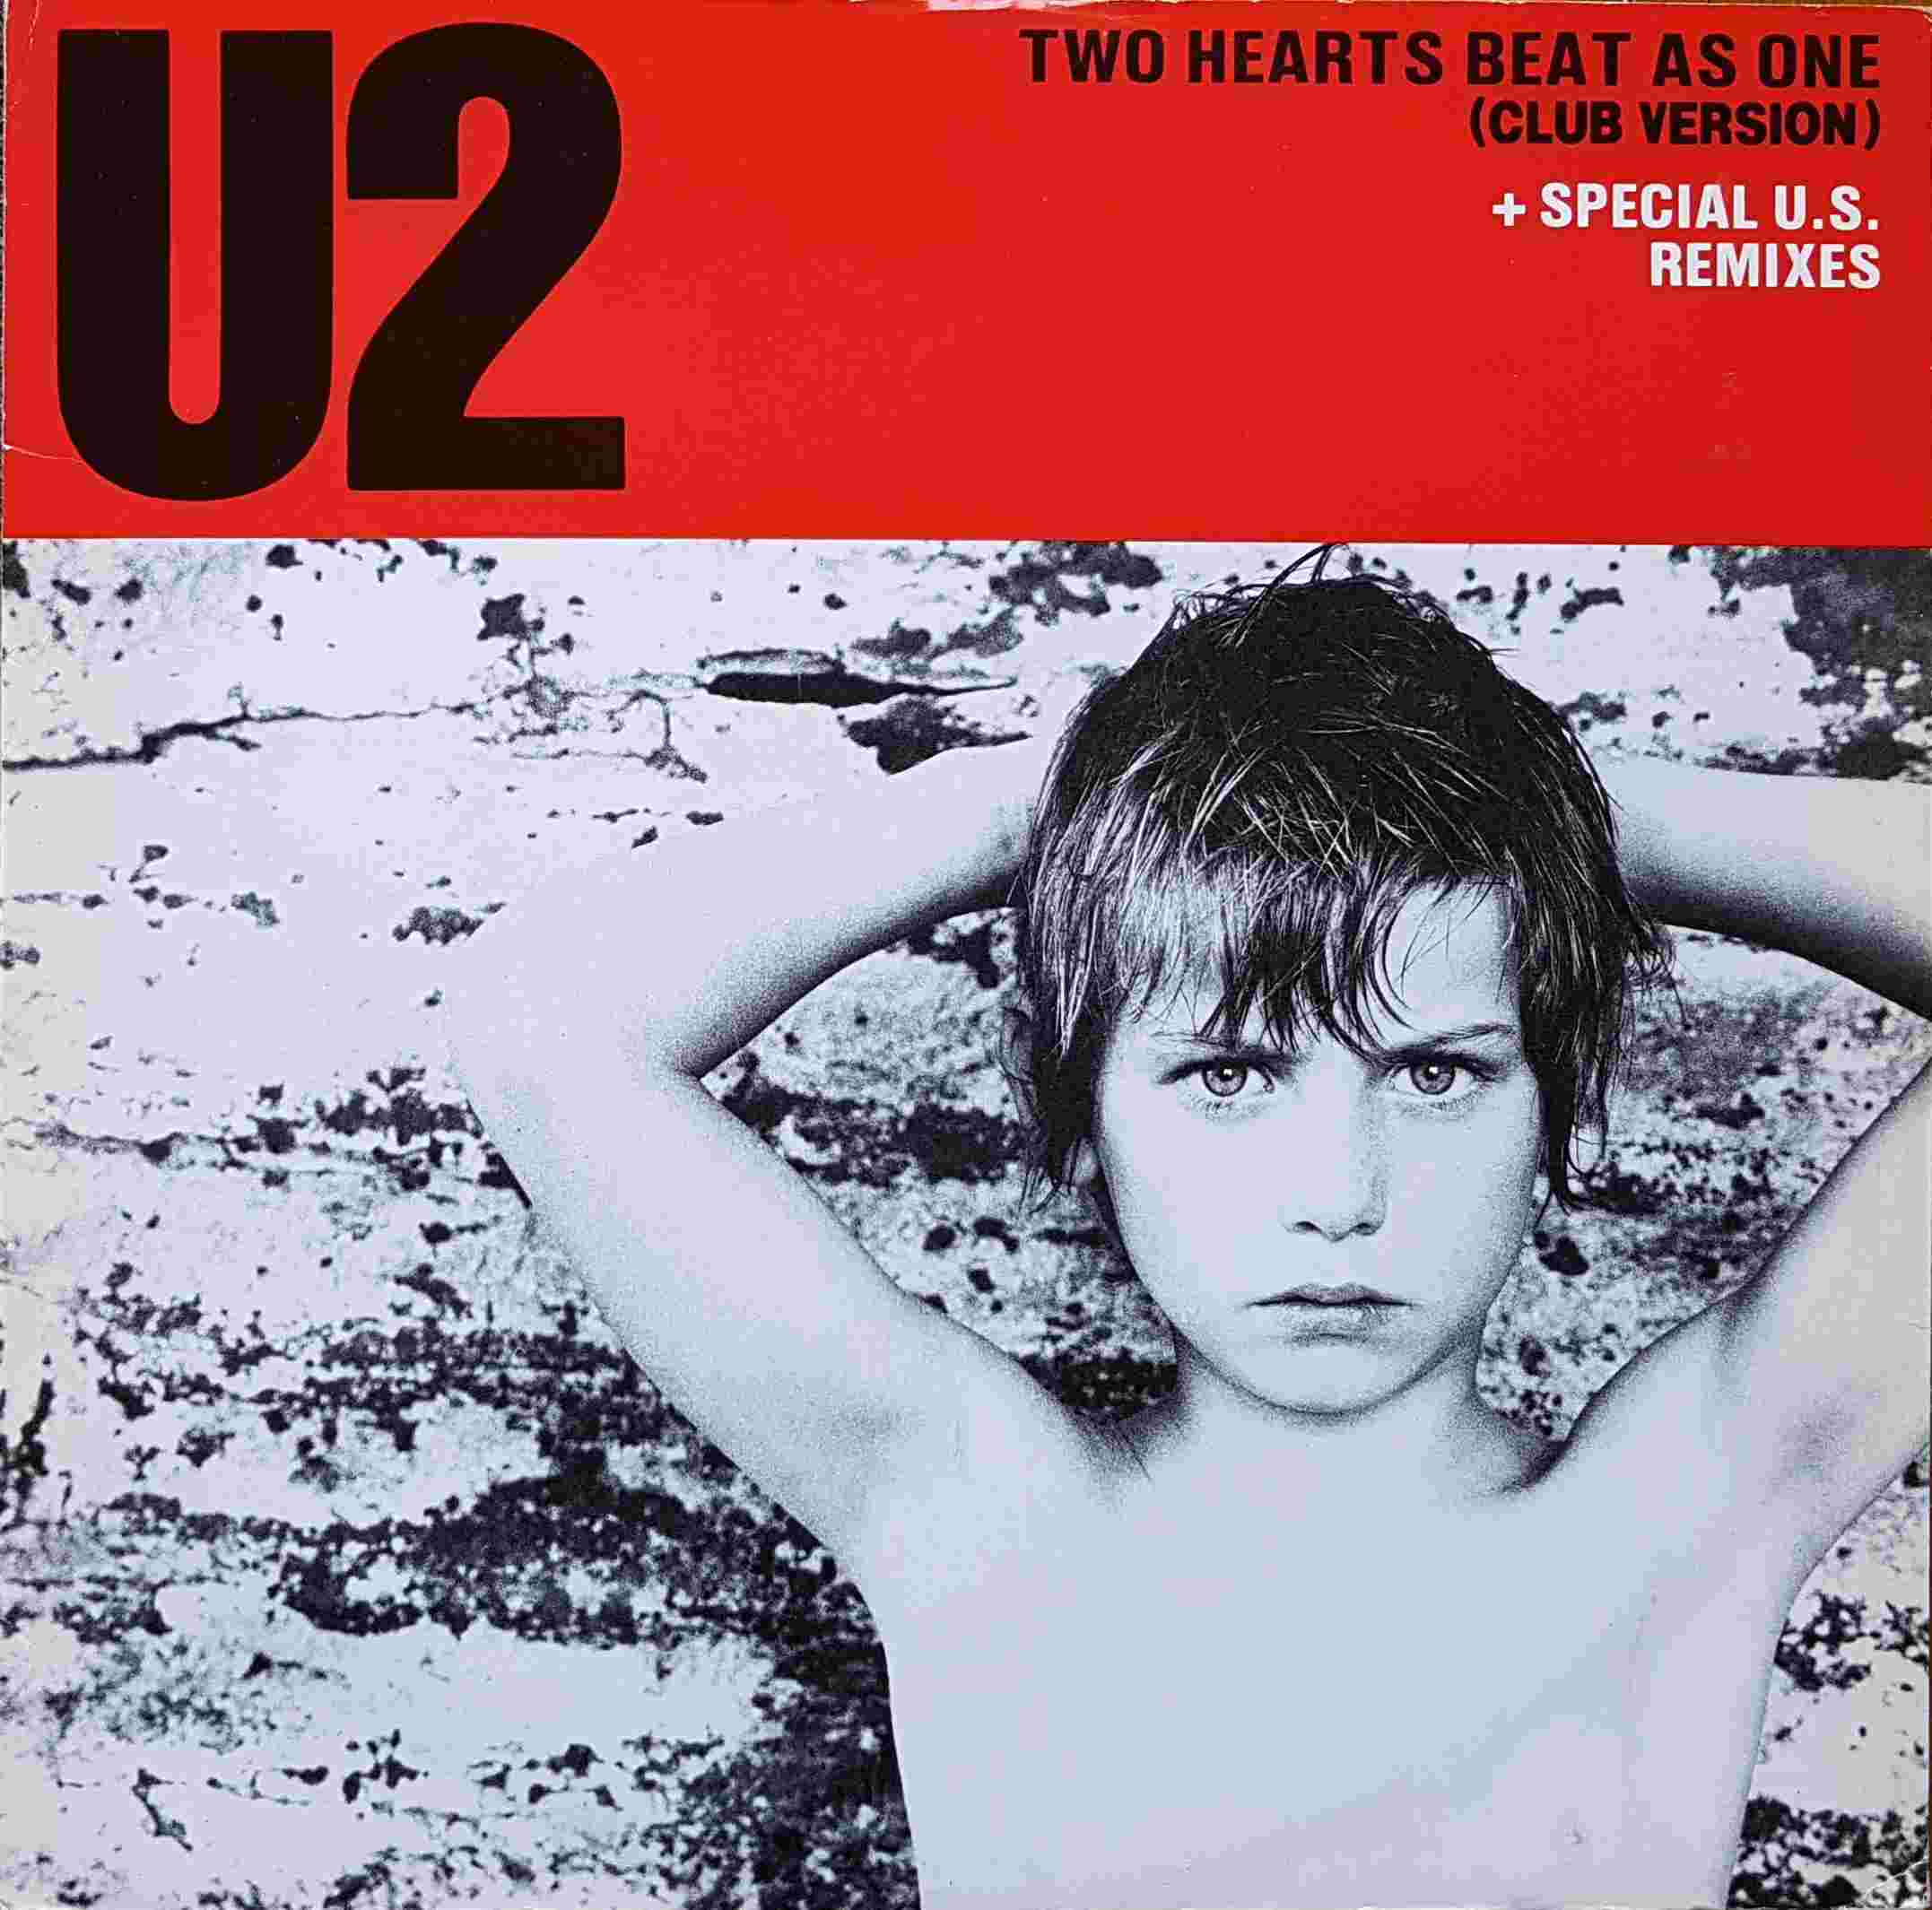 Picture of Two hearts beat as one by artist U2 